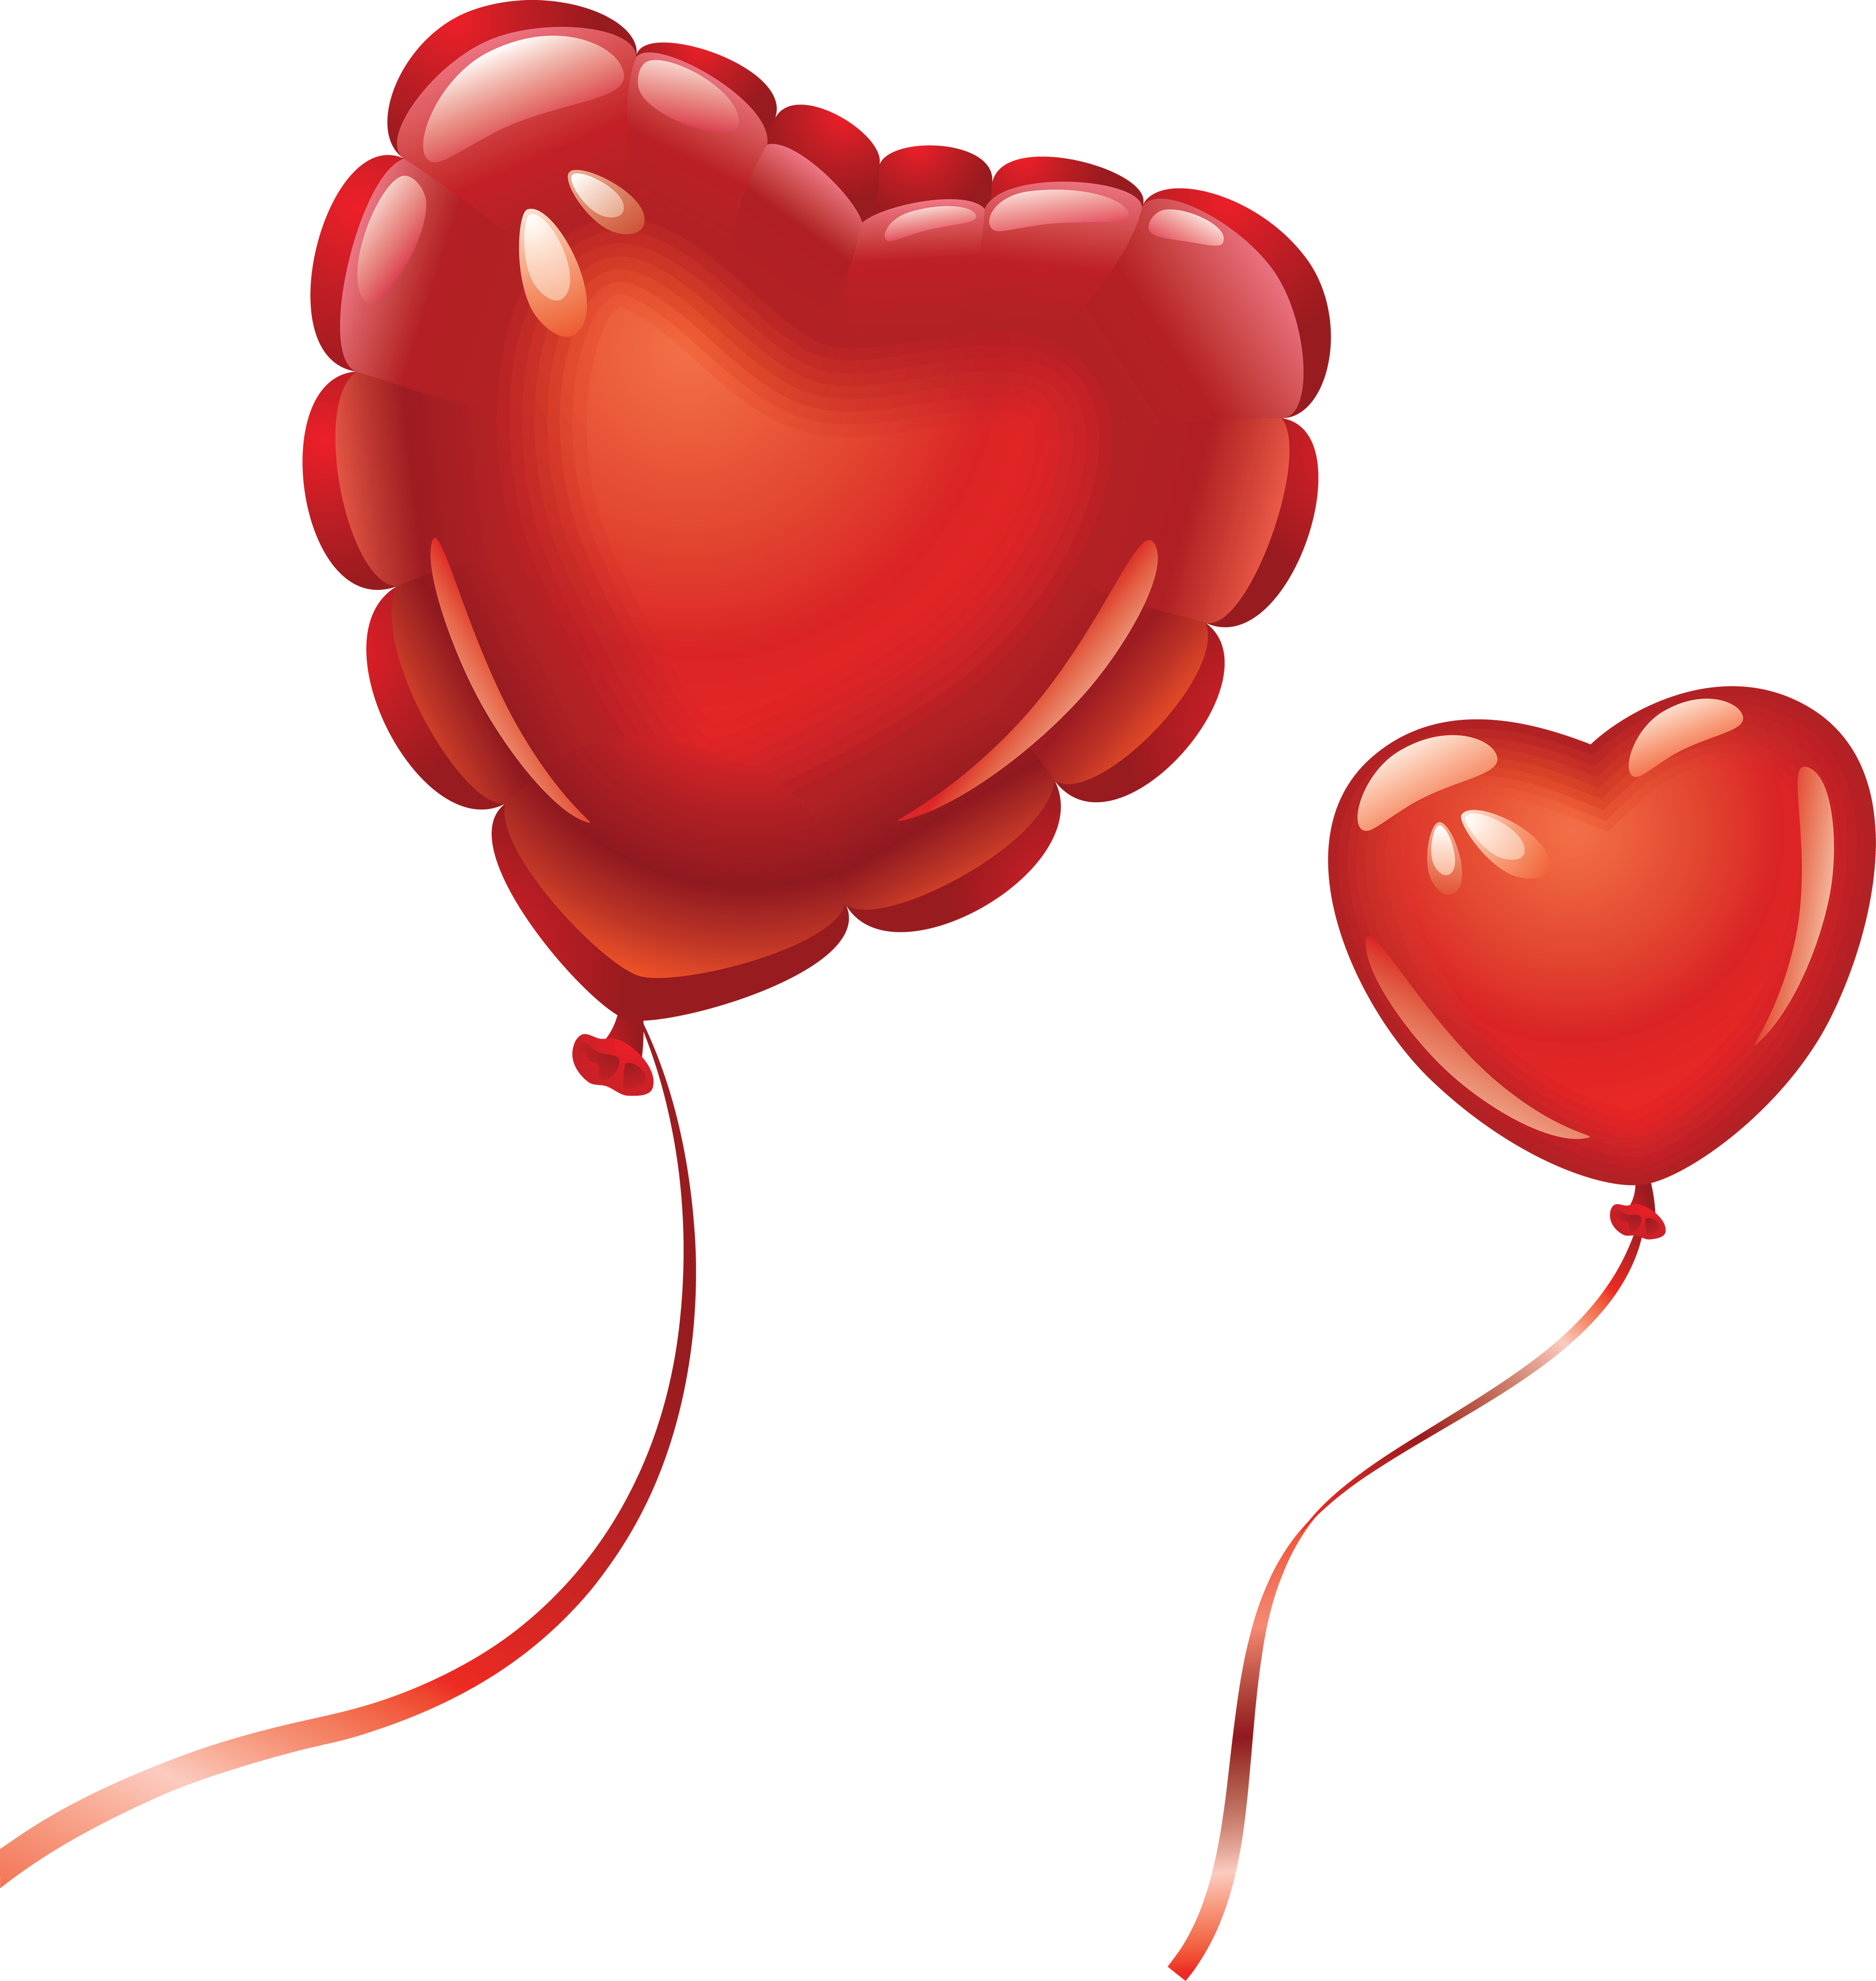 Heart Balloon Png Image, Free Download, Heart Balloons - Balloon Png Hd Download - HD Wallpaper 